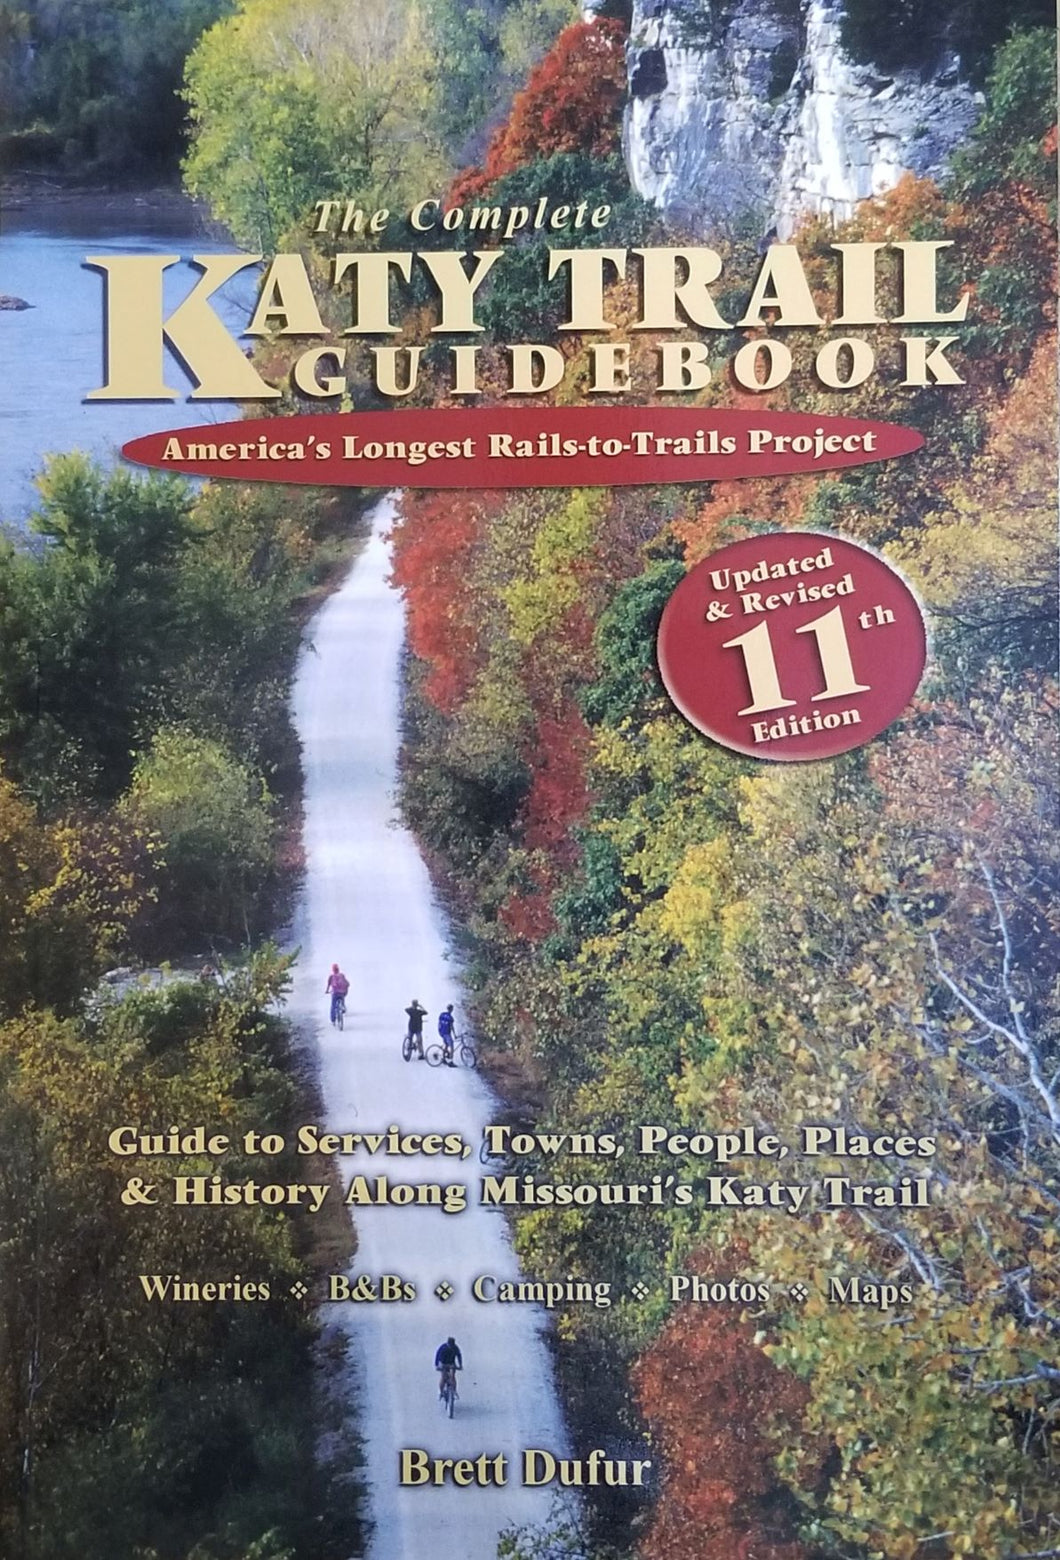 The Complete Katy Trail Guidebook, Newest Edition.